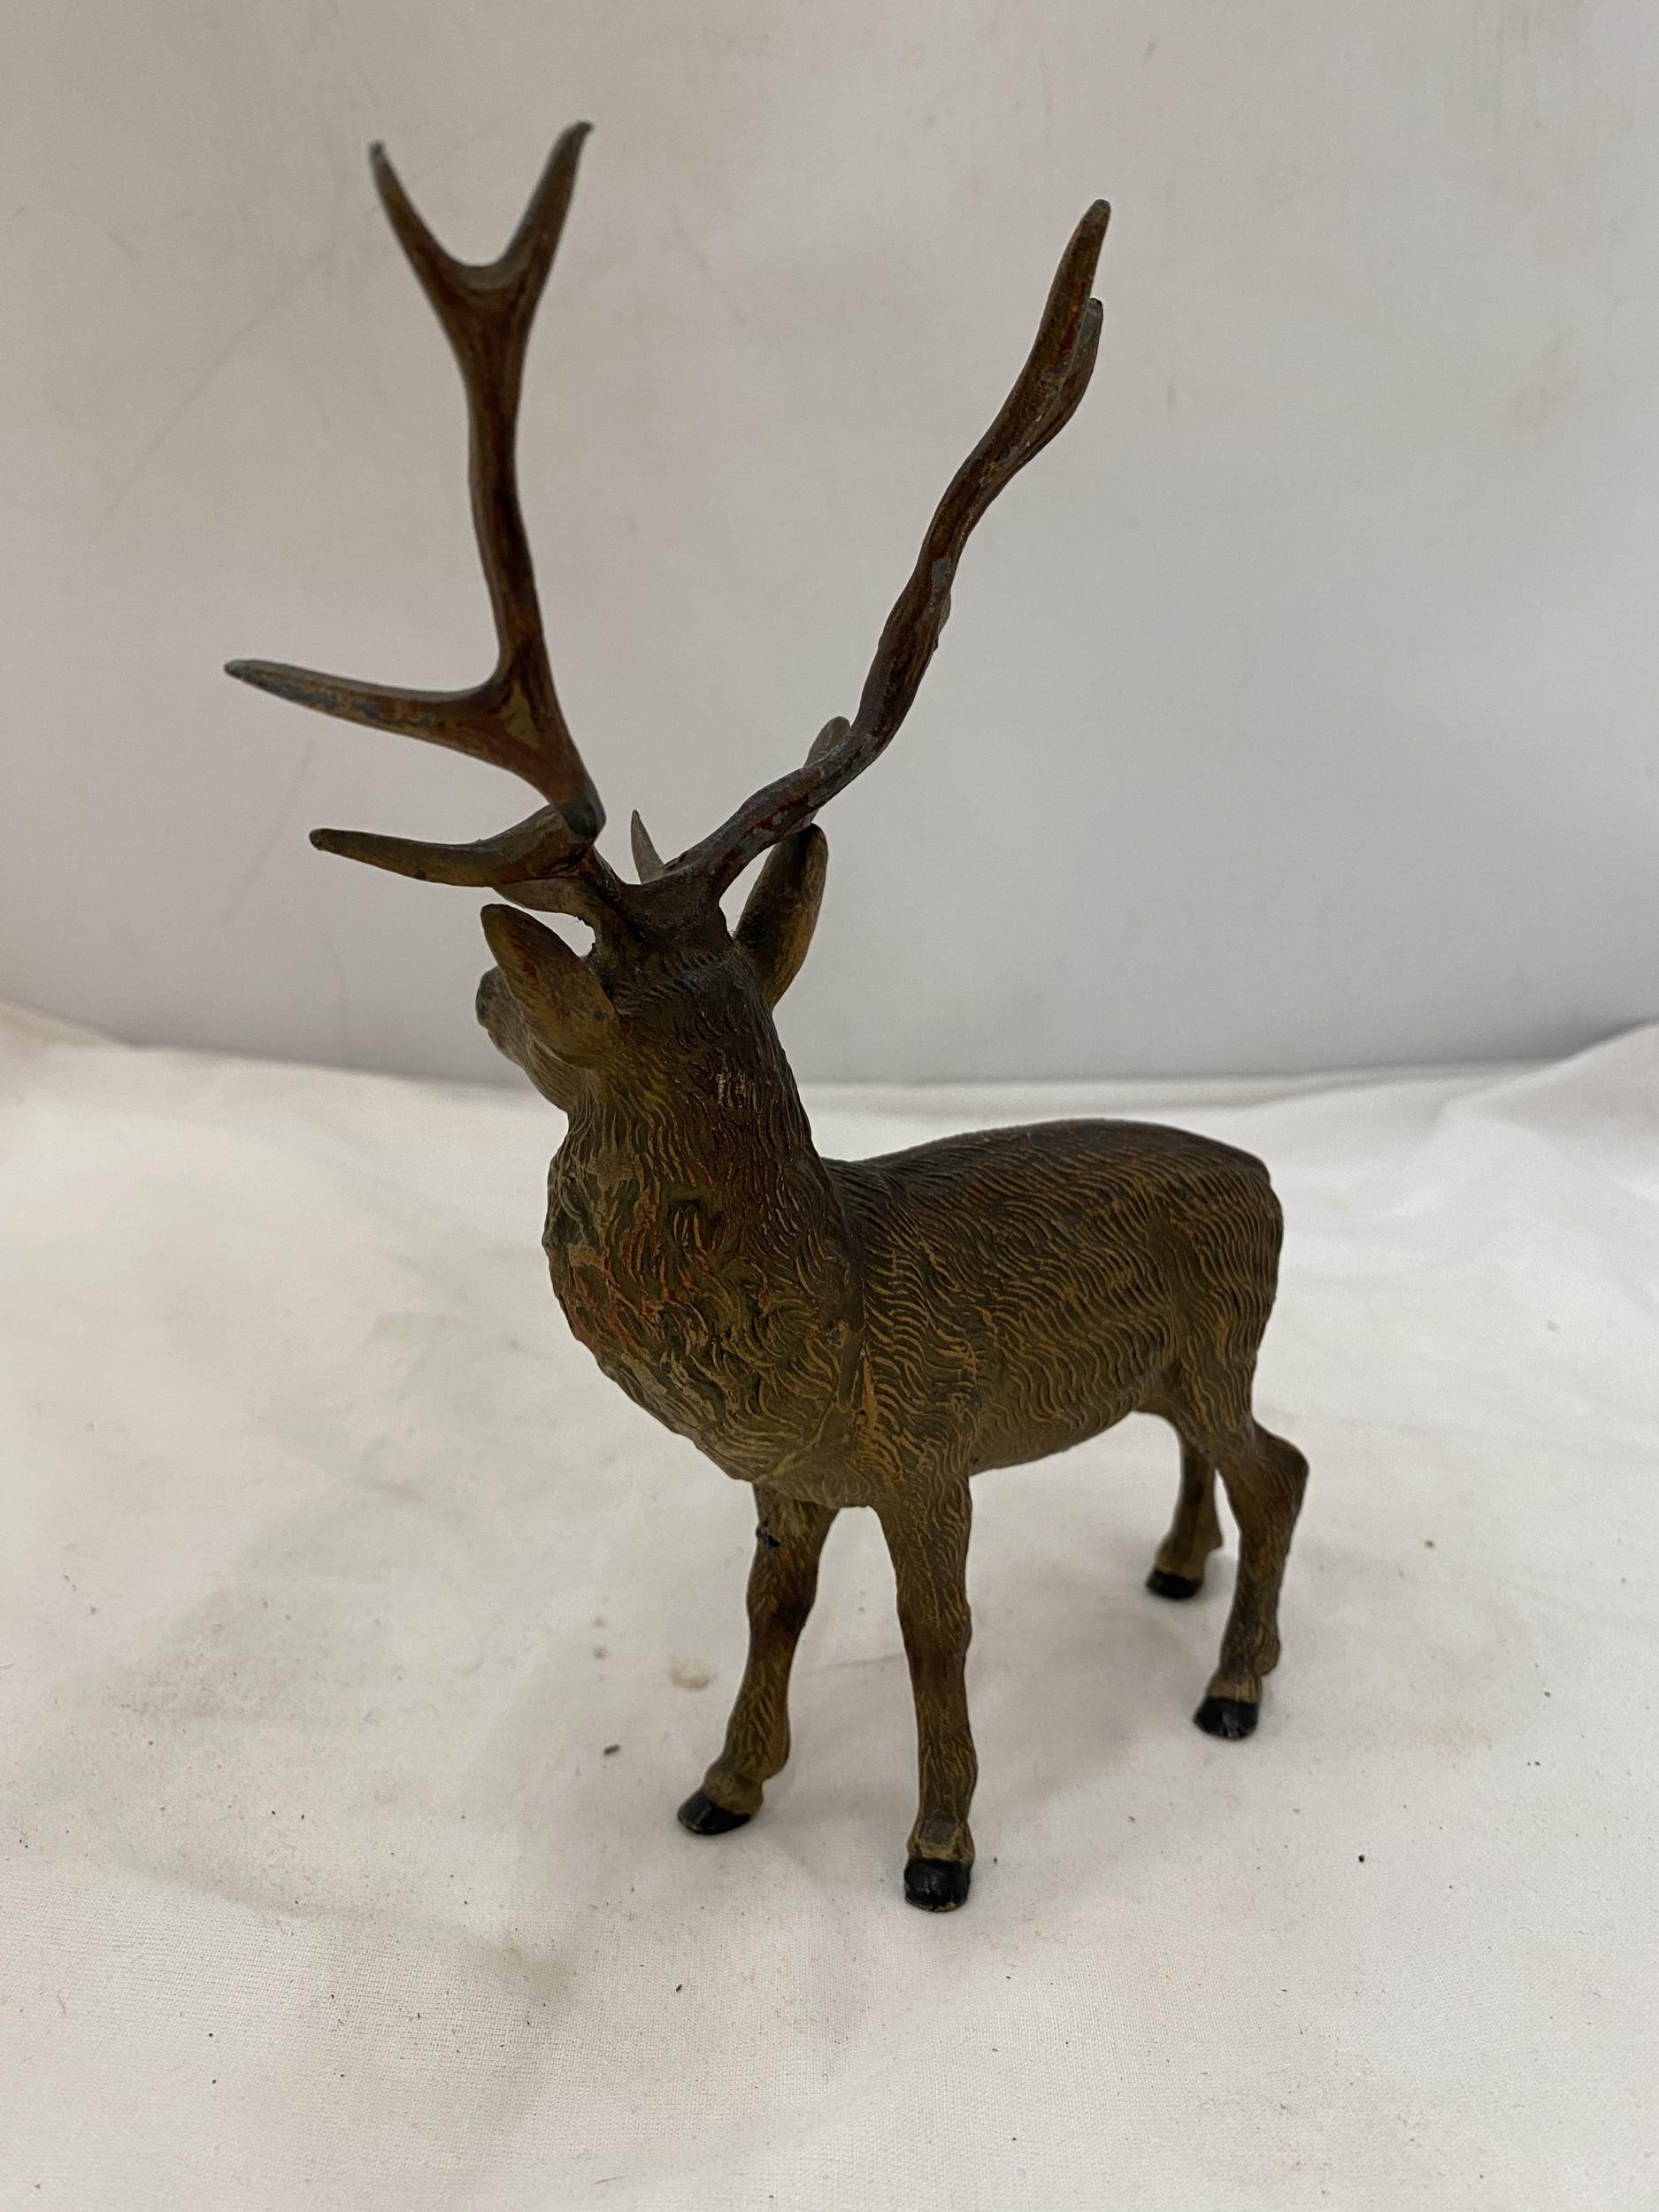 A GOLD PAINTED AUSTRIAN STAG FIGURE - Image 4 of 6